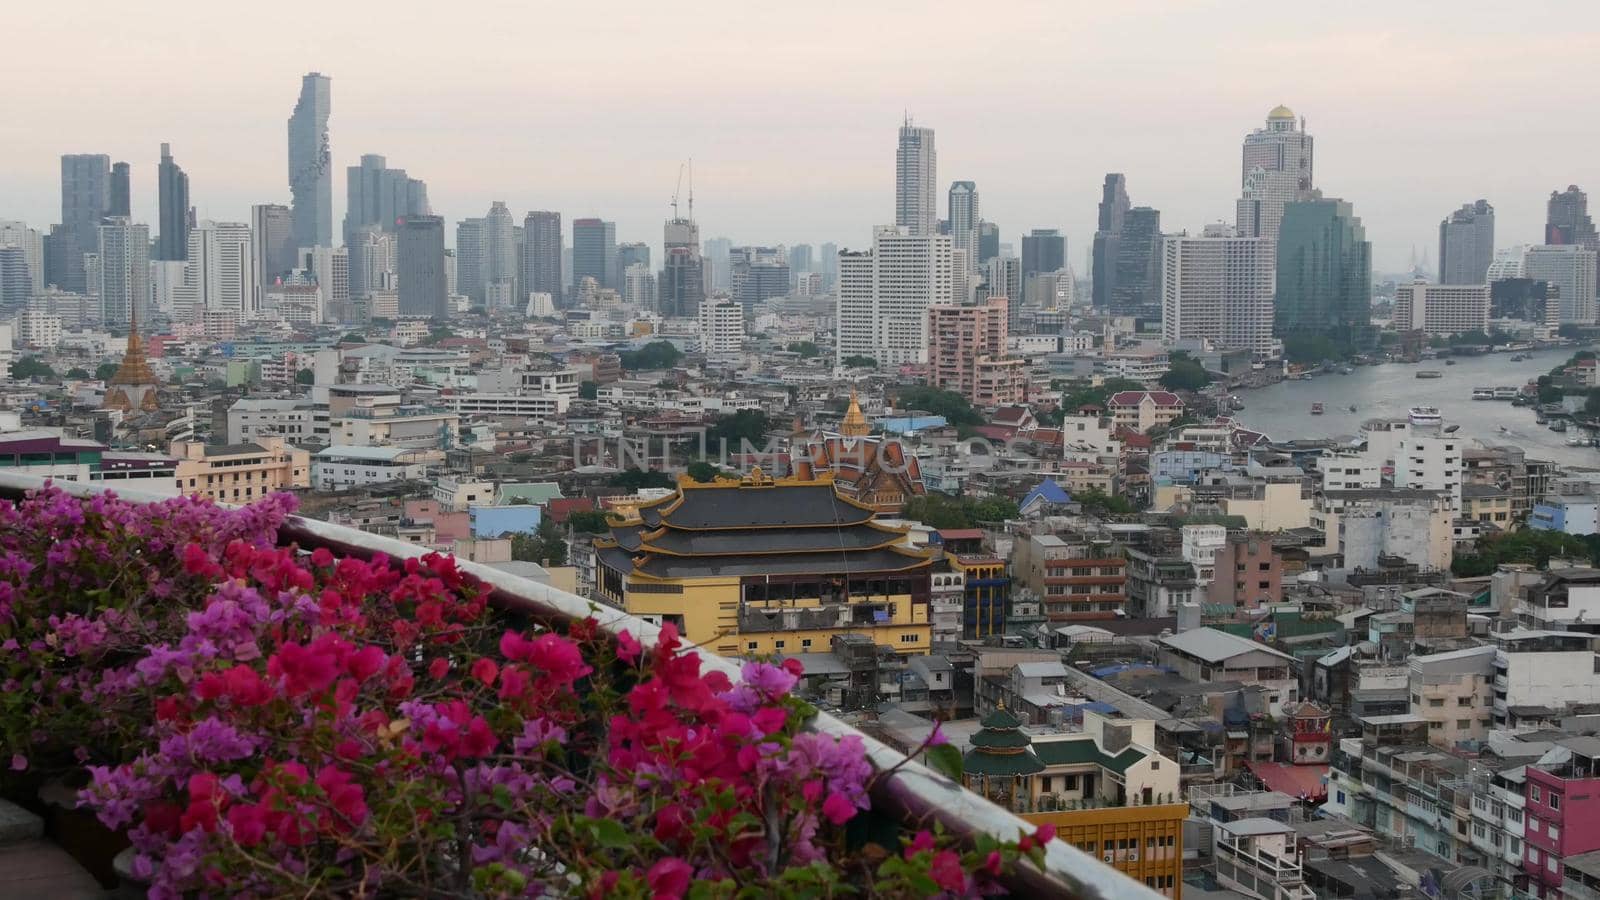 View of traditional and modern buildings of oriental city. Beautiful flowerbed against cityscape of traditional houses and skyscrapers on misty day on streets of Bangkok or Krungtep. by DogoraSun